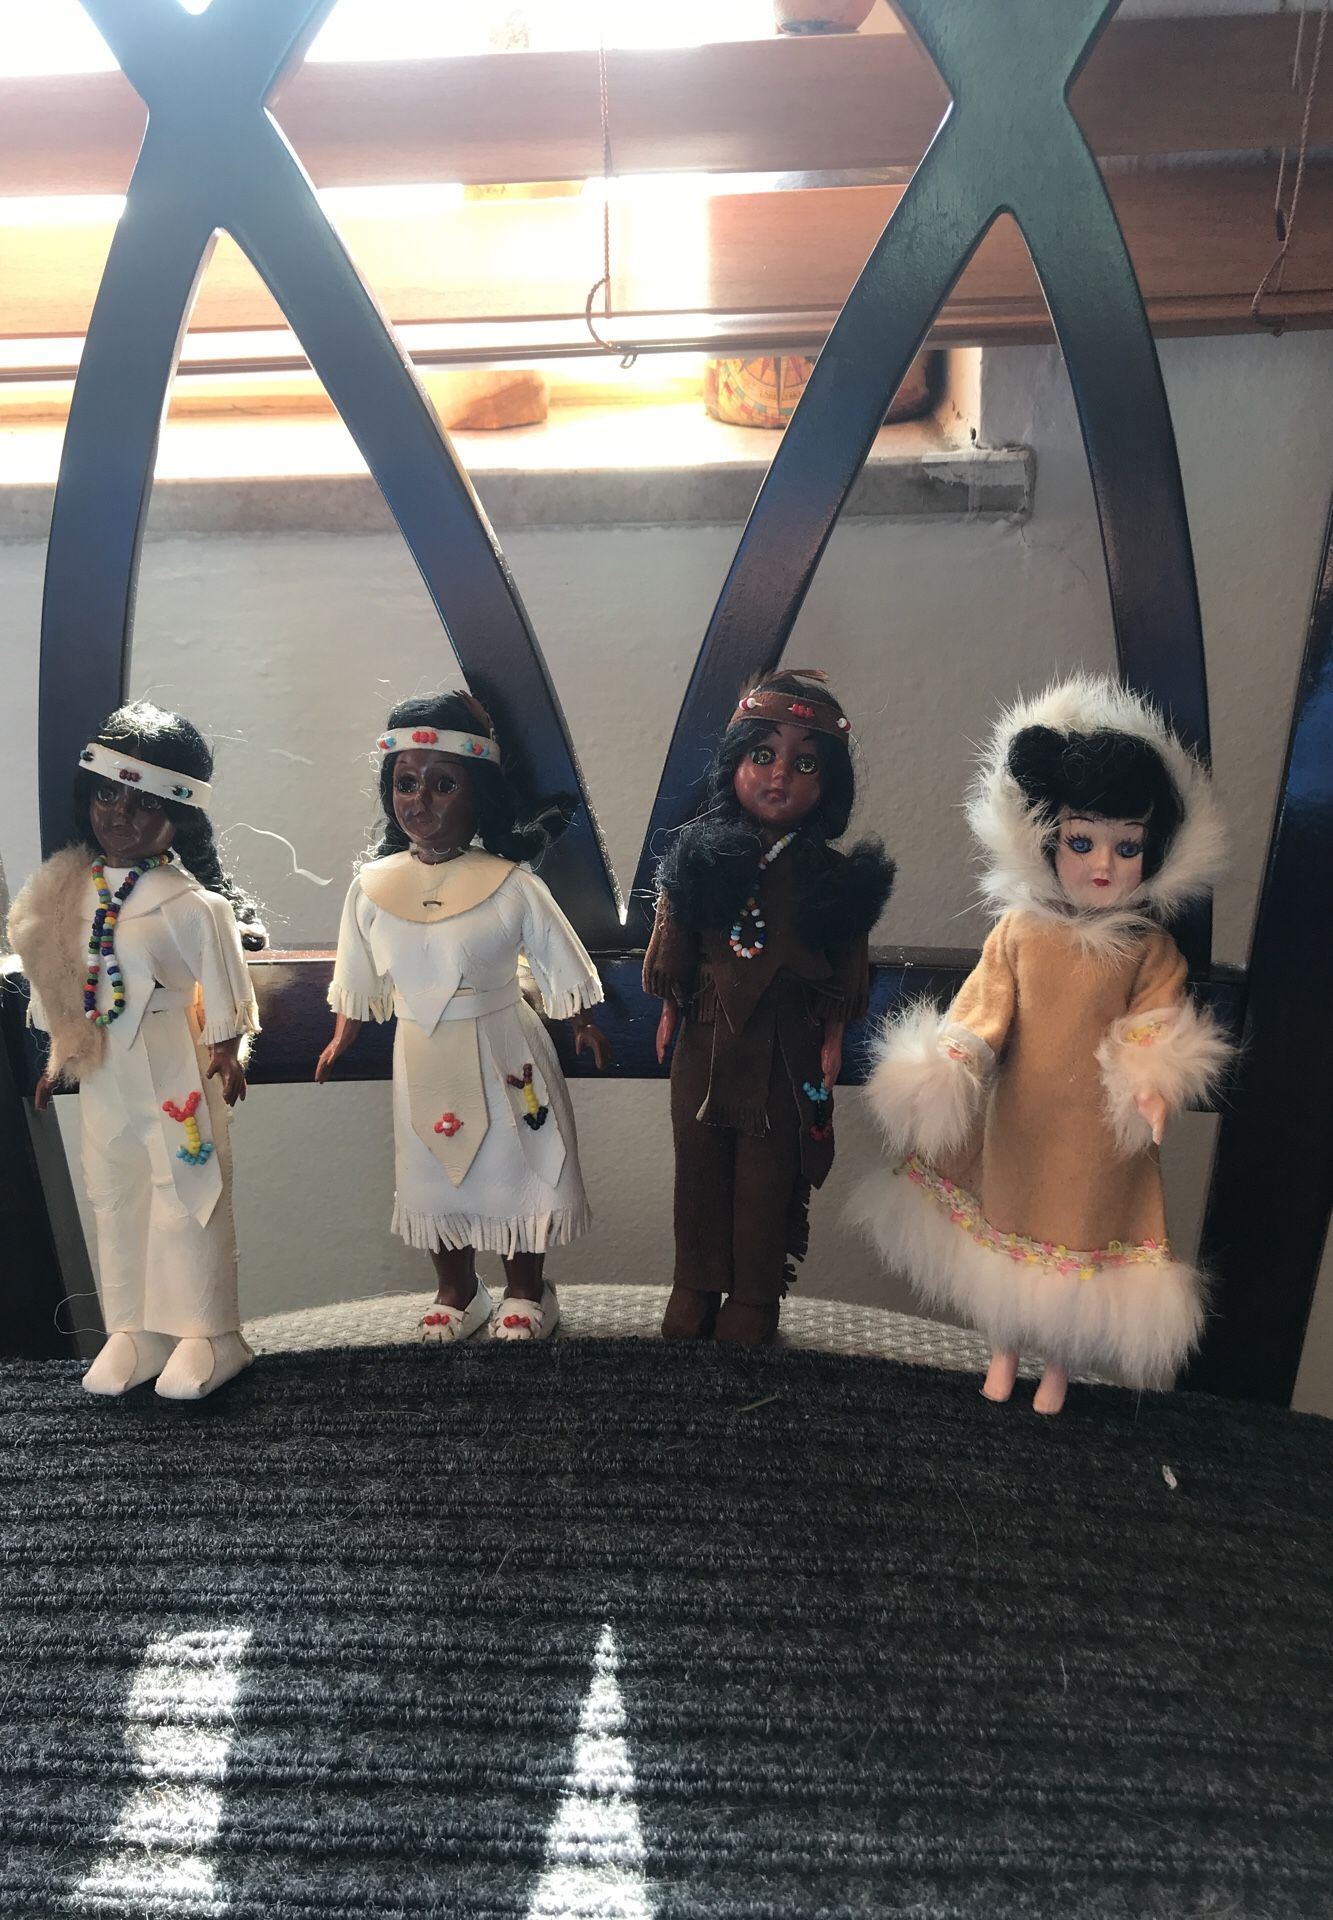 Antique Native American dolls 5.00 for all 4